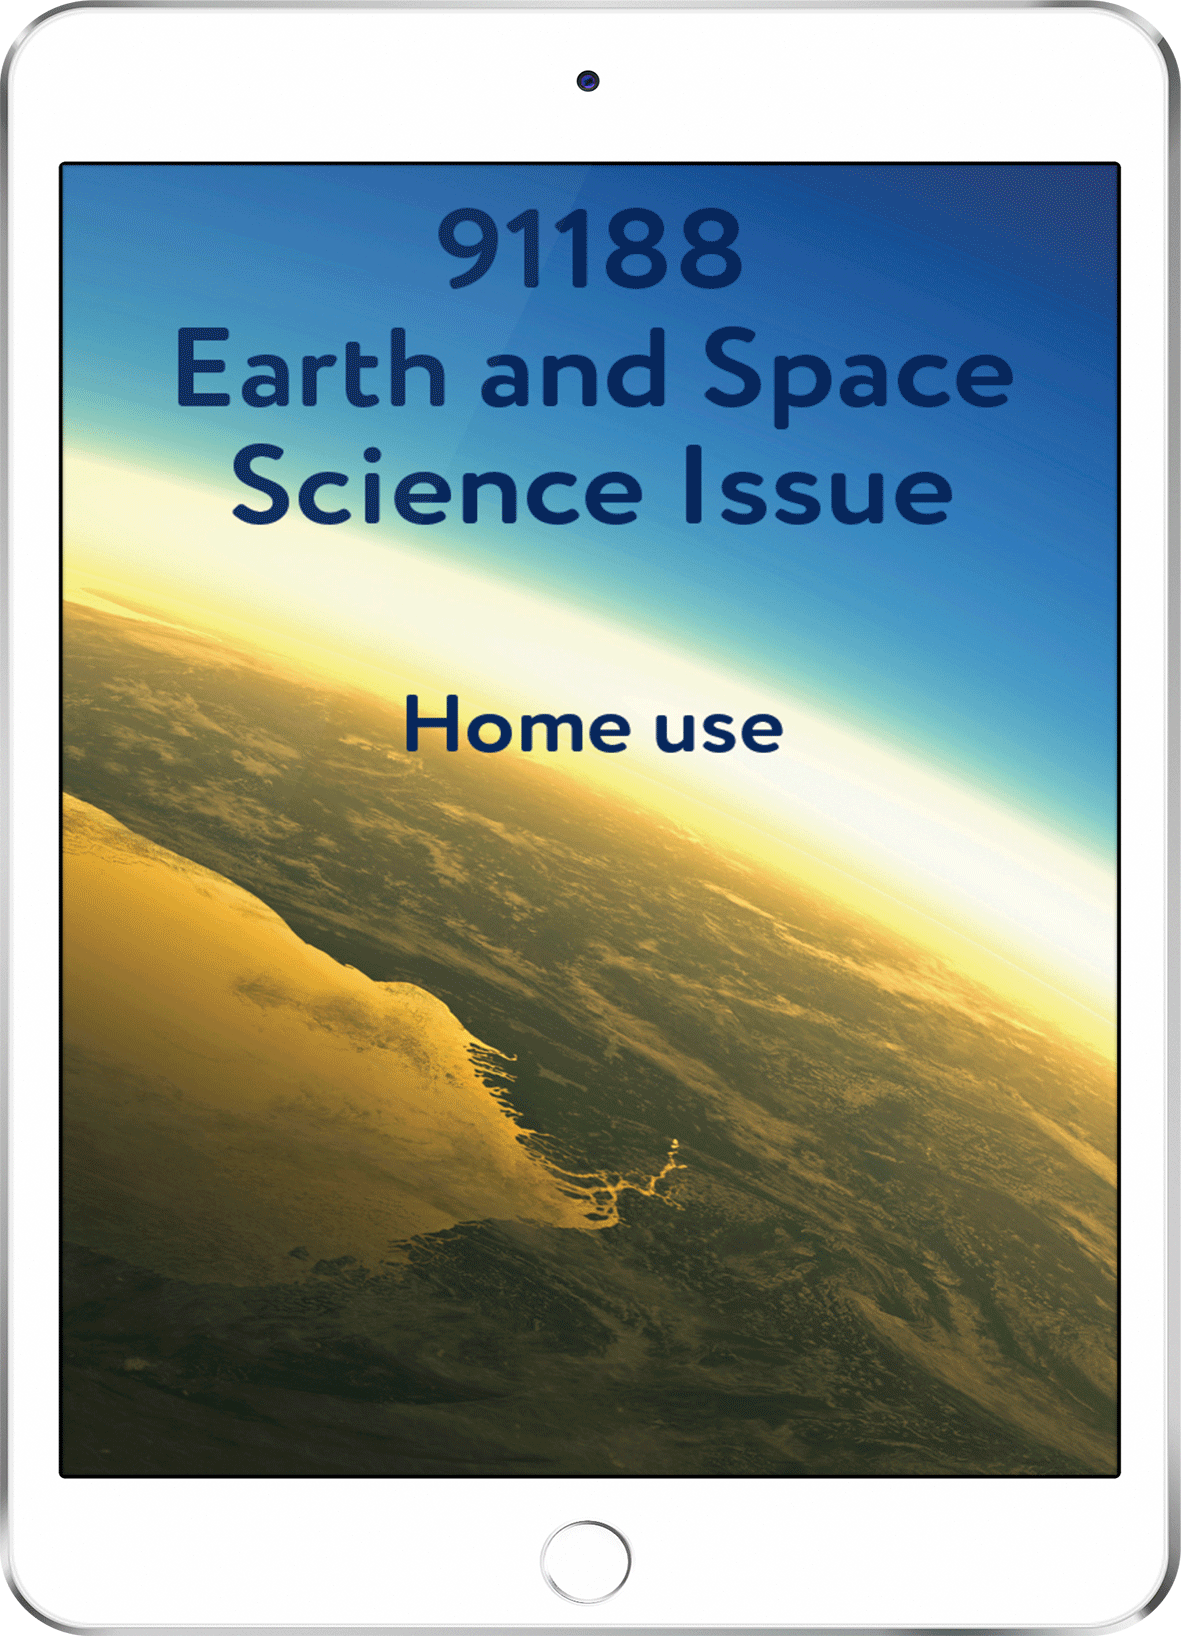 91188 Earth and Space Science Issue - Home Use